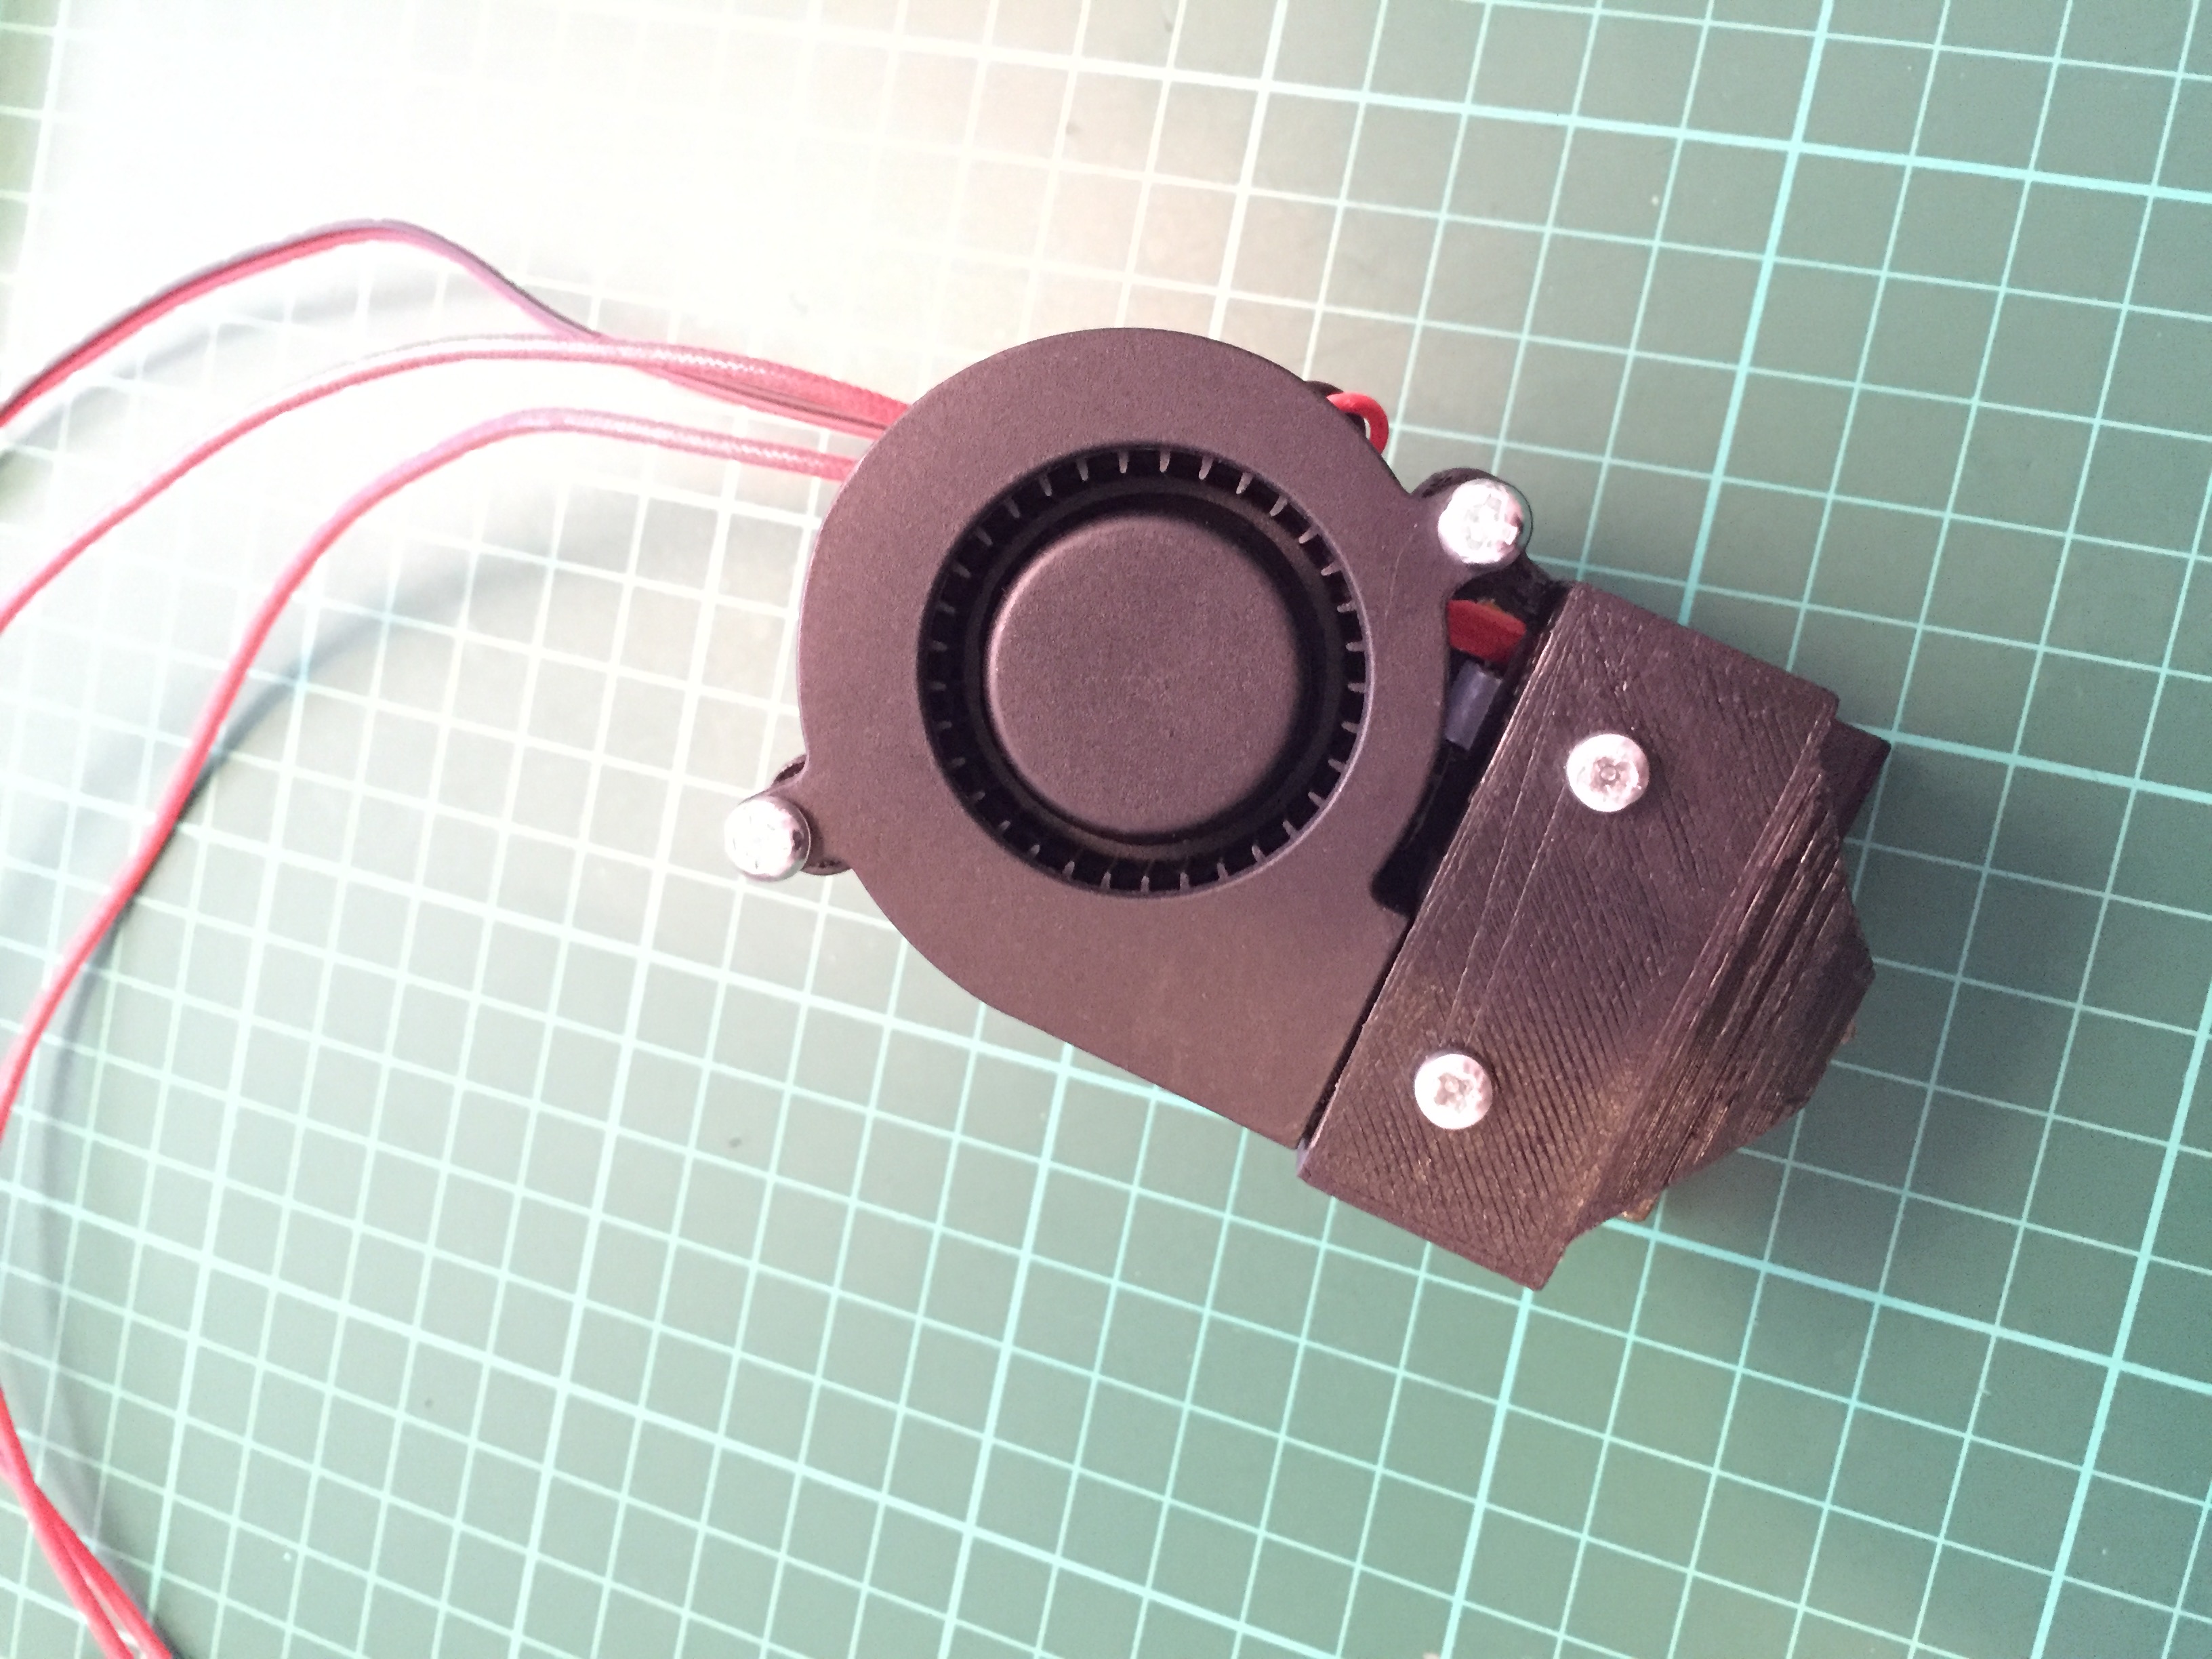 XYZ Printing daVinci Jr 1.0 - Stock Hotend Compact Mount with Silent/Quiet Part Cooling Fan